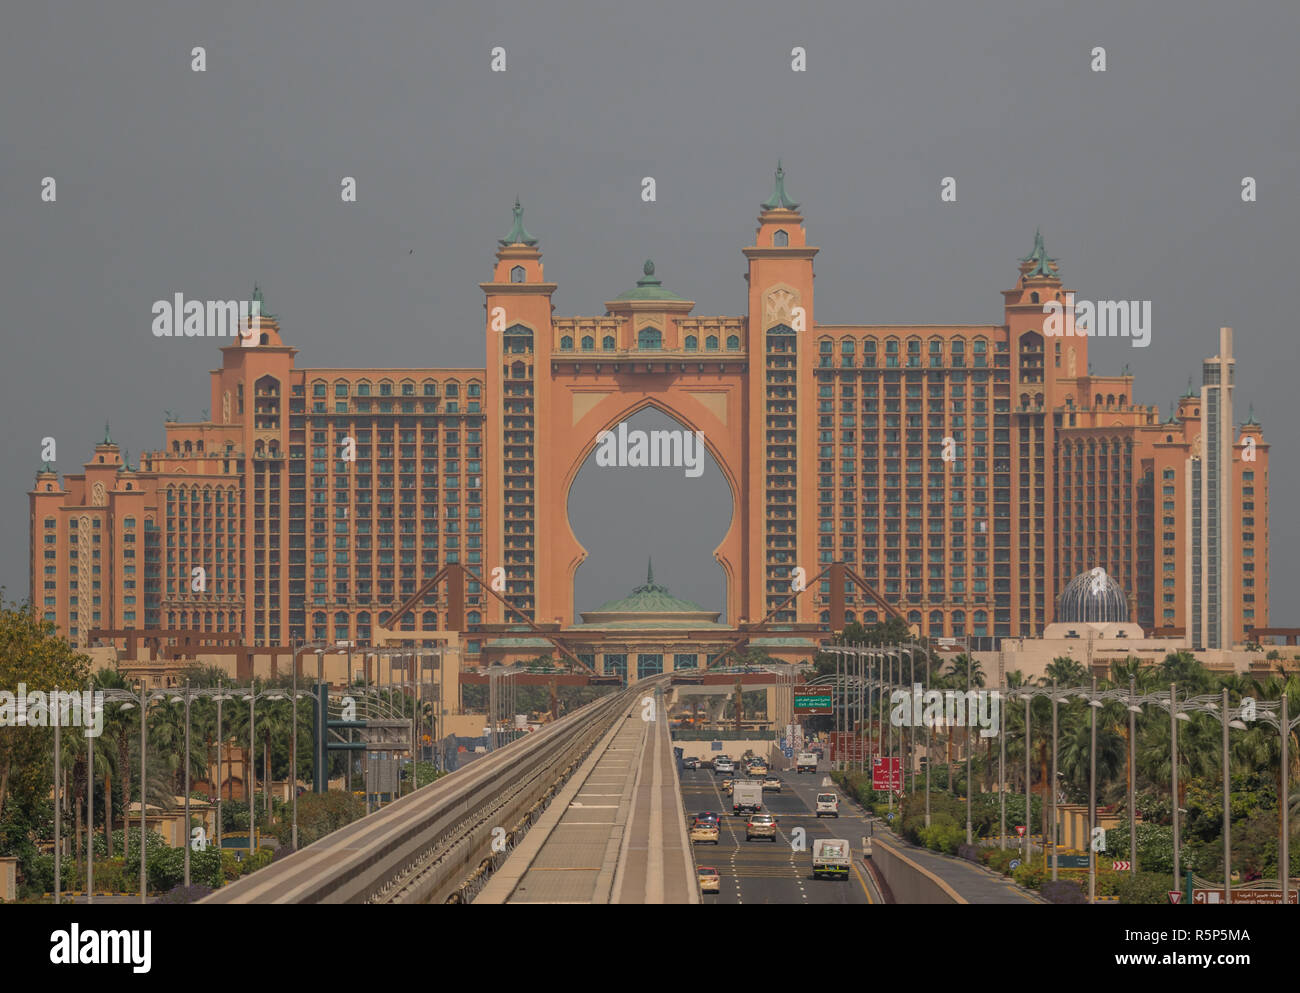 Dubai, United Arab Emirates - the Atlantis Hotel is one of the most unmistakable landmark of the UAE, and one of most luxury hotels in the world Stock Photo